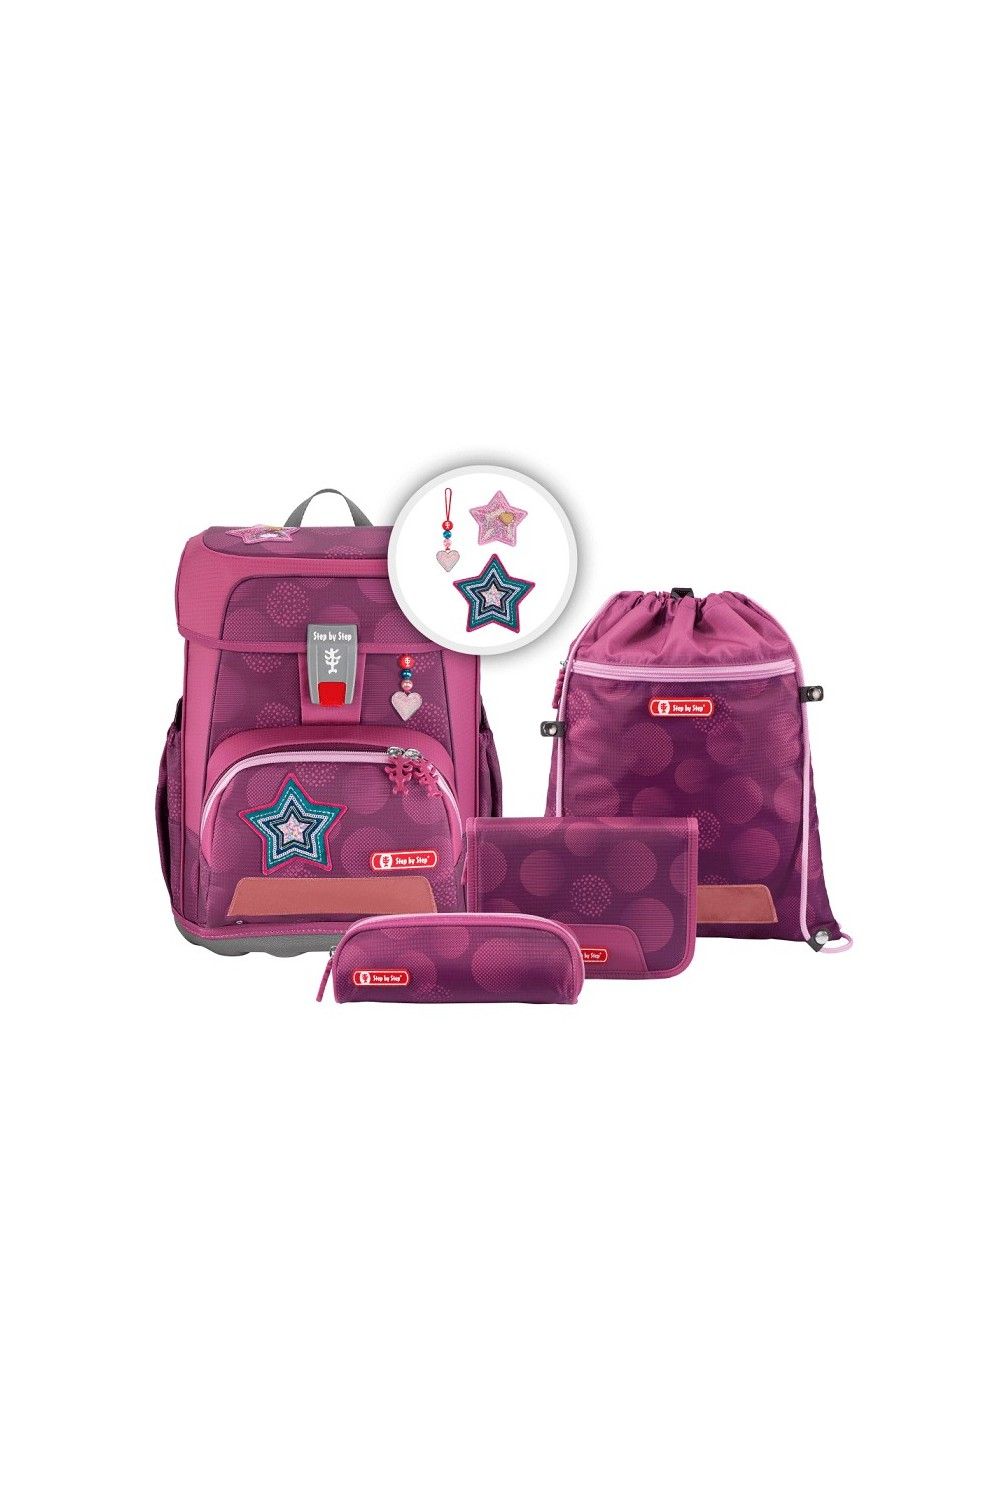 School backpack set Step by Step Cloud 5 pieces Glamour Star